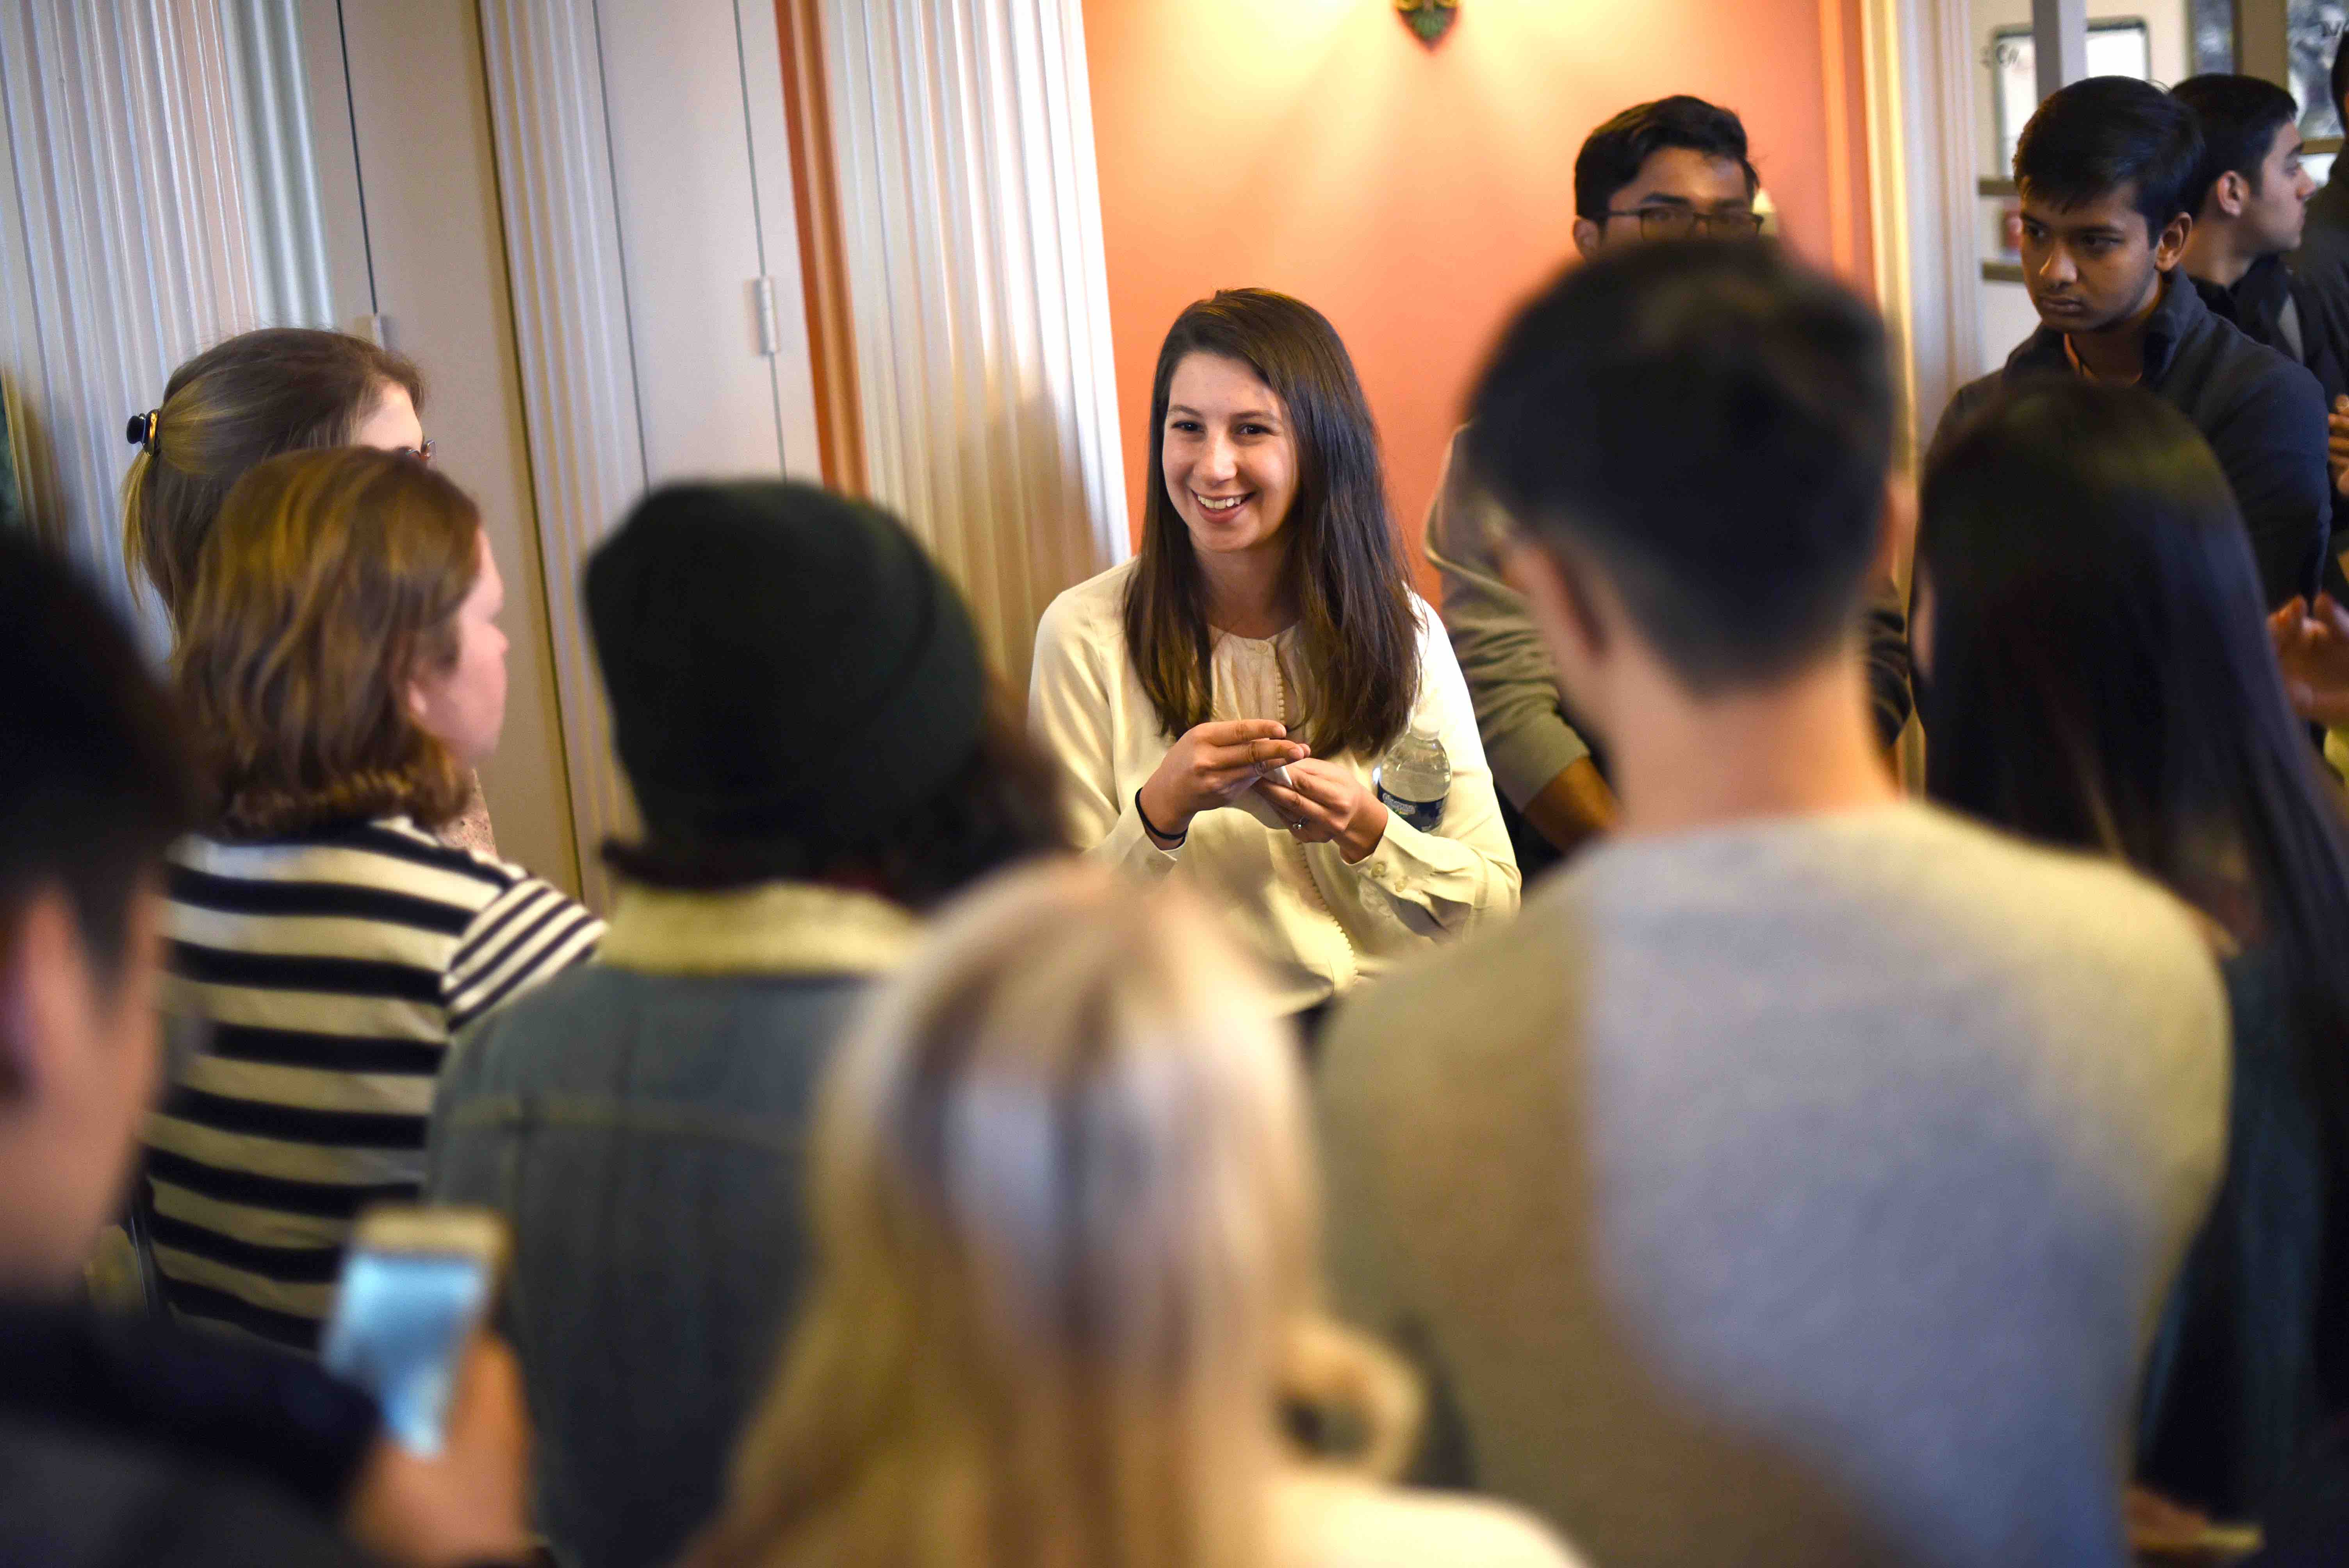 Dr. Katie Bouman chats with a crowd of students